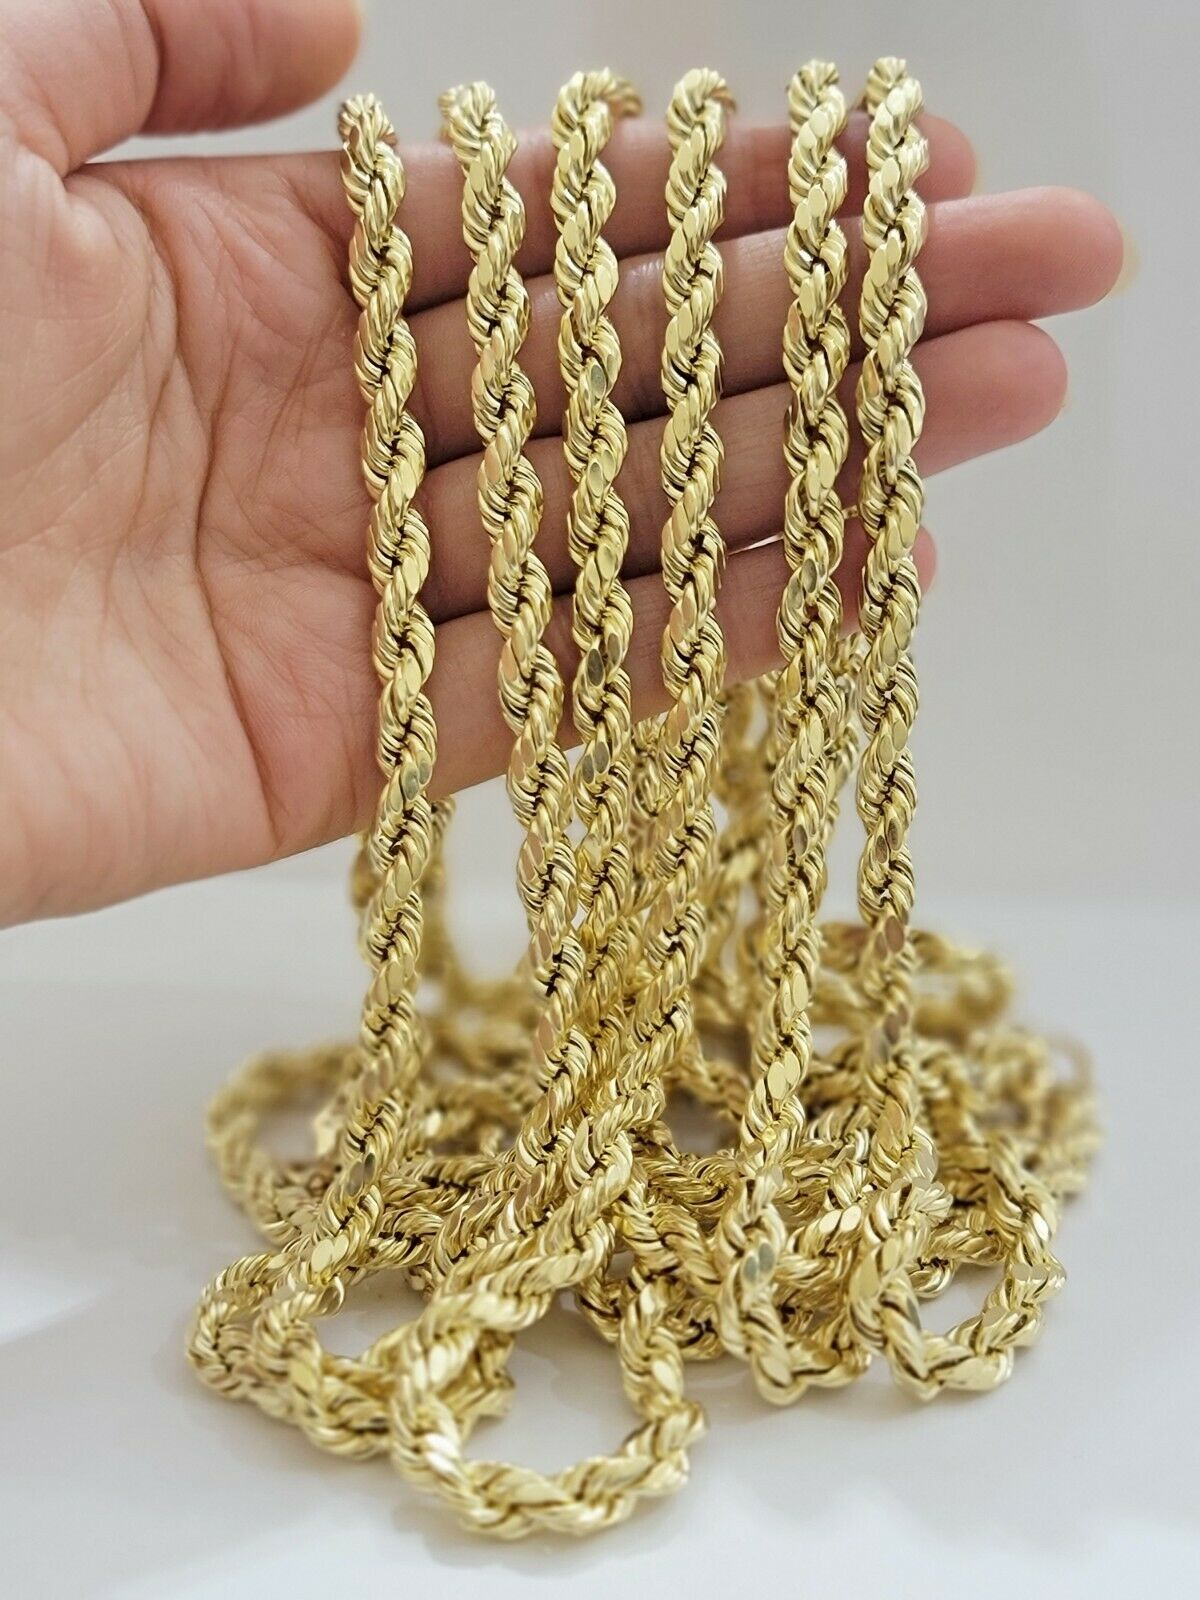 Real Gold 10k Rope Necklace Men' Chain 7mm 18